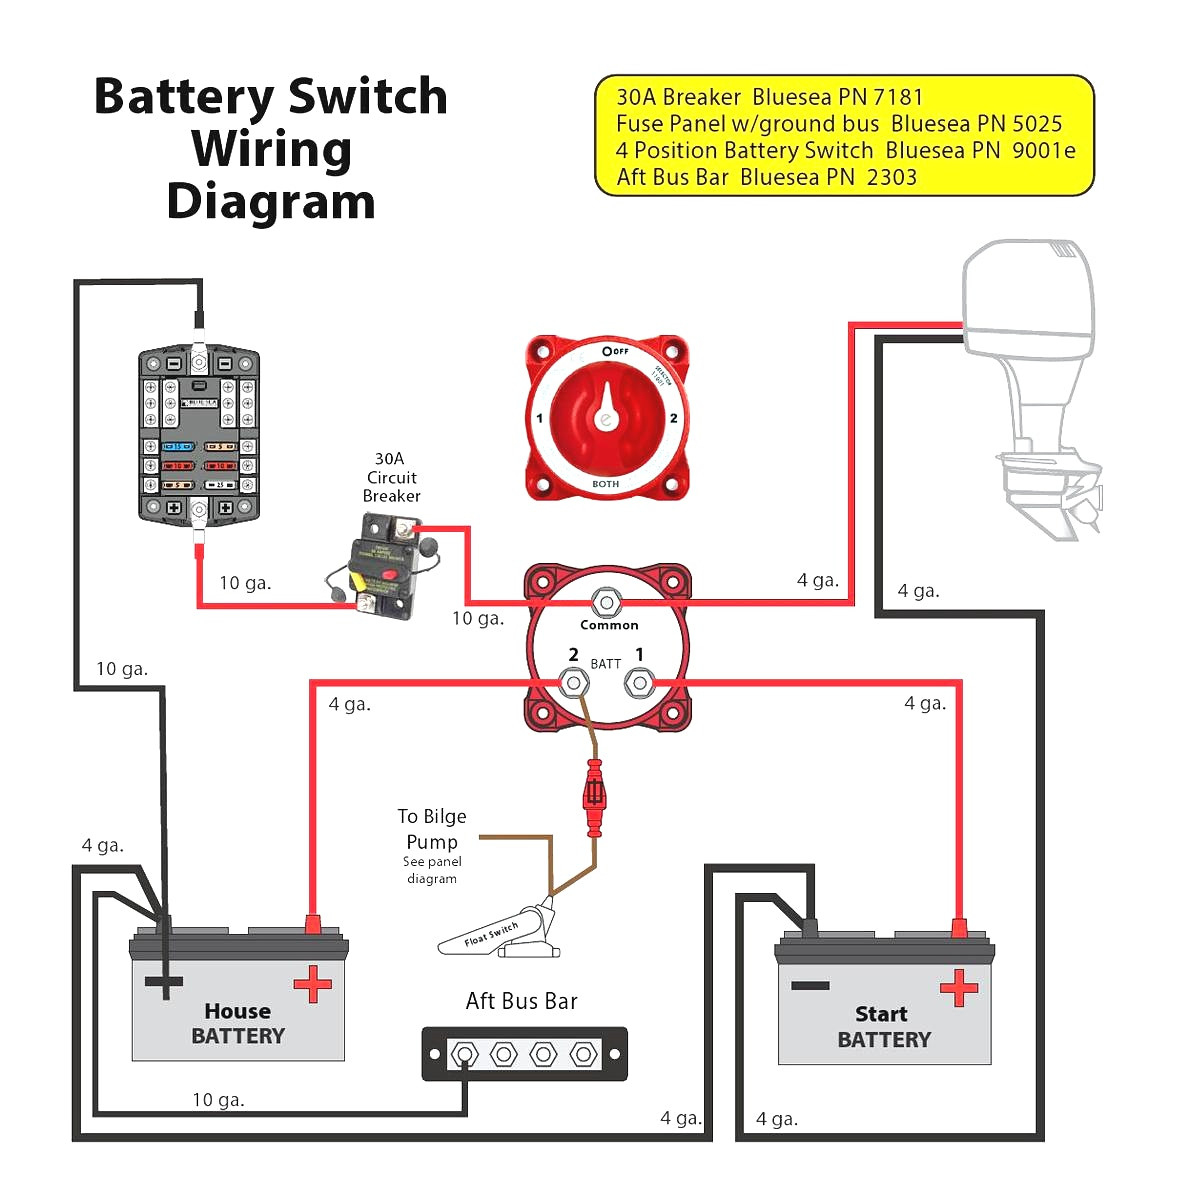 Battery Wire Diagrams | Wiring Diagram - Dual Battery Switch Wiring Diagram